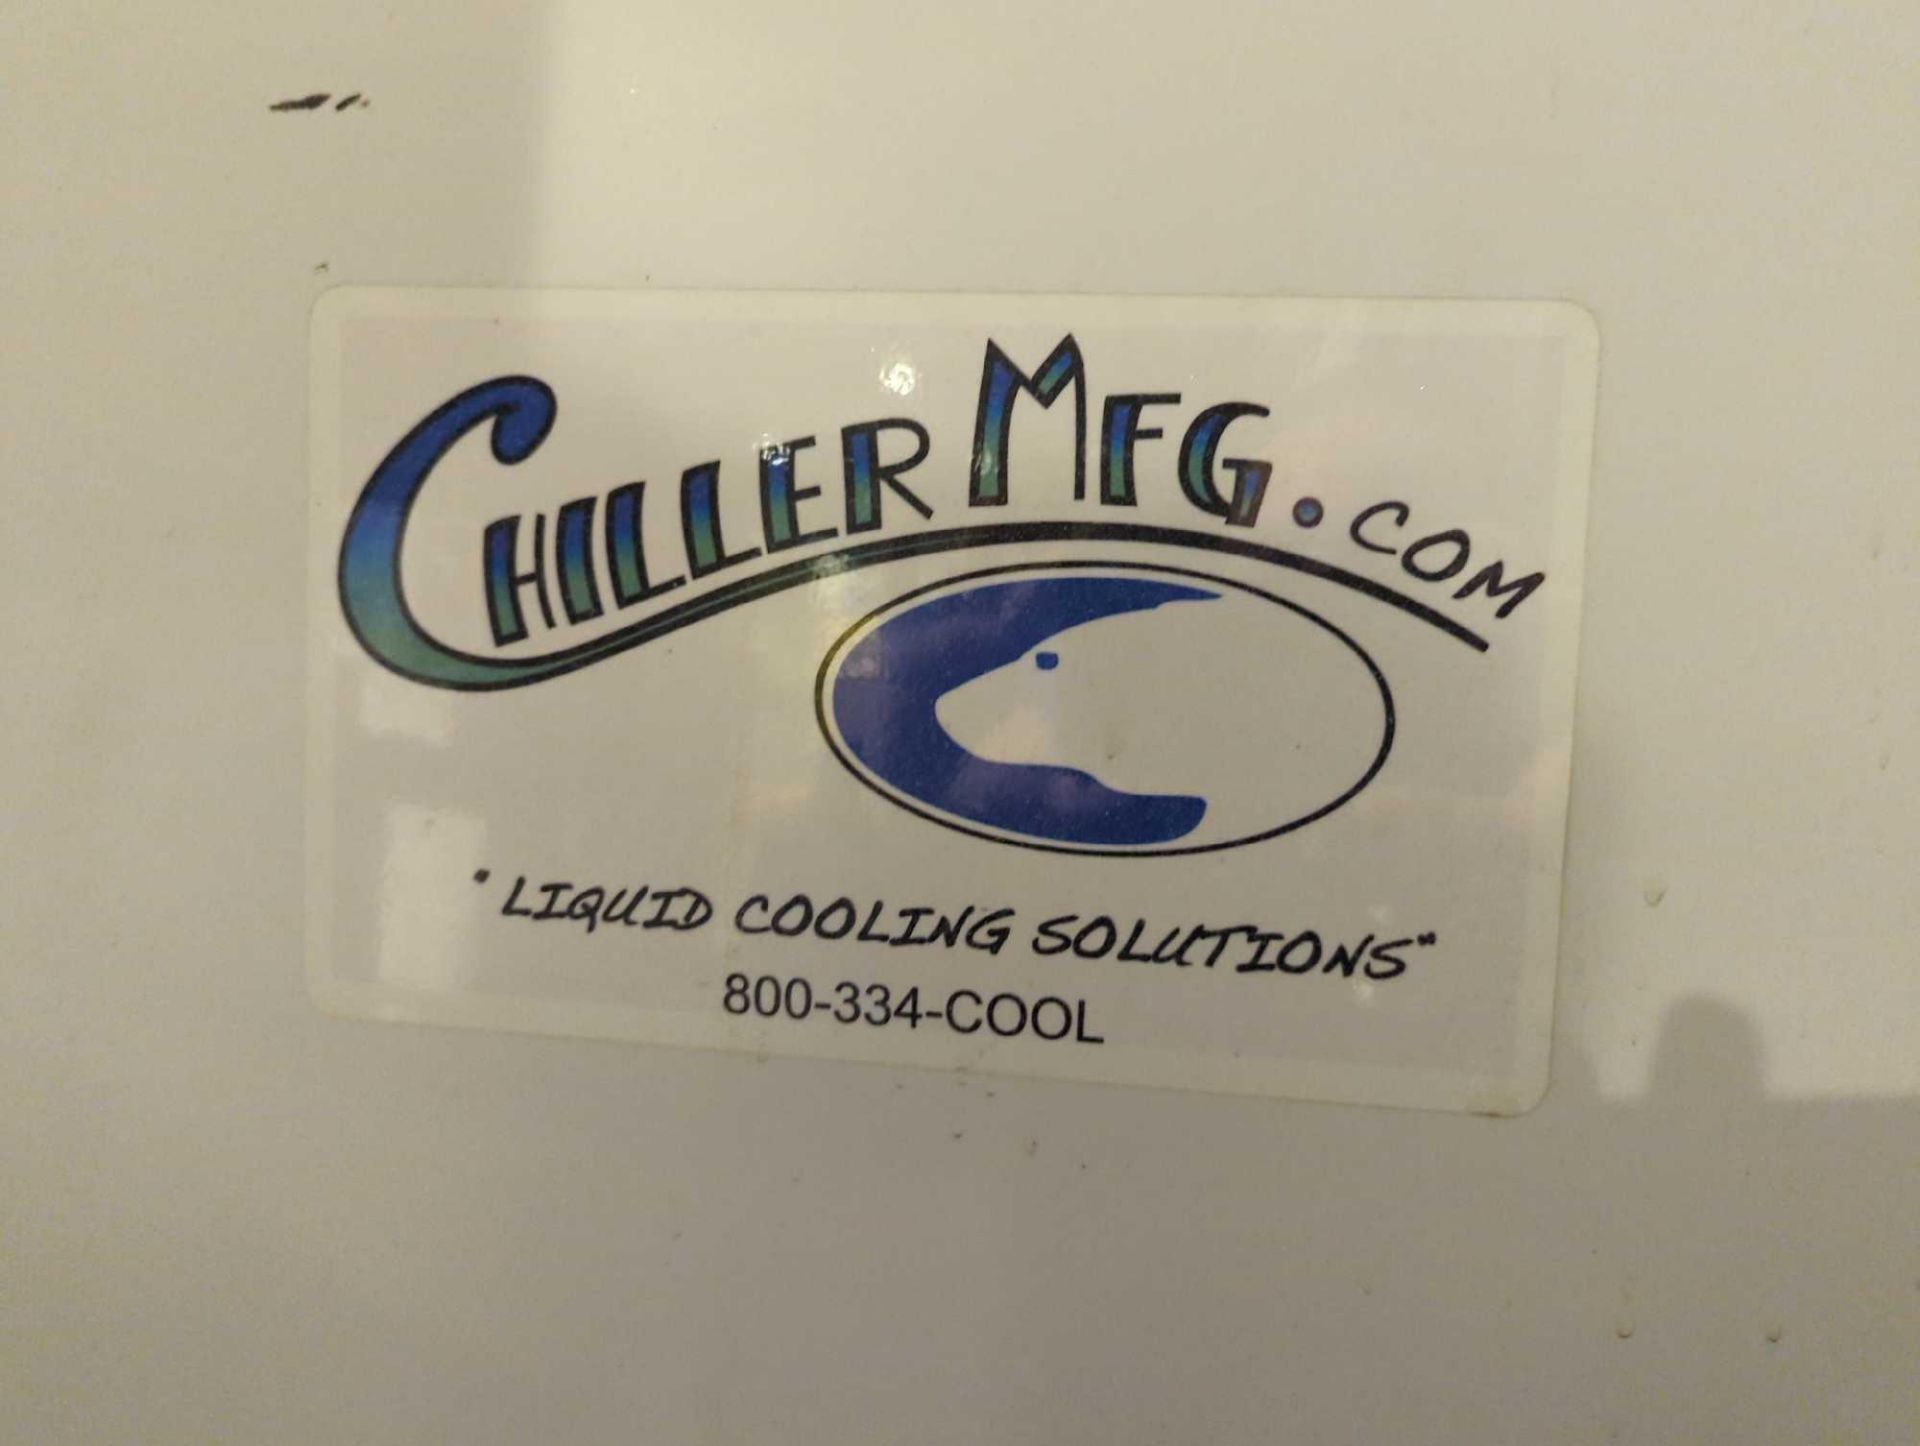 Chiller Mfg. Co. 10 Ton Water / Glycol Cooled Chiller - Image 8 of 8